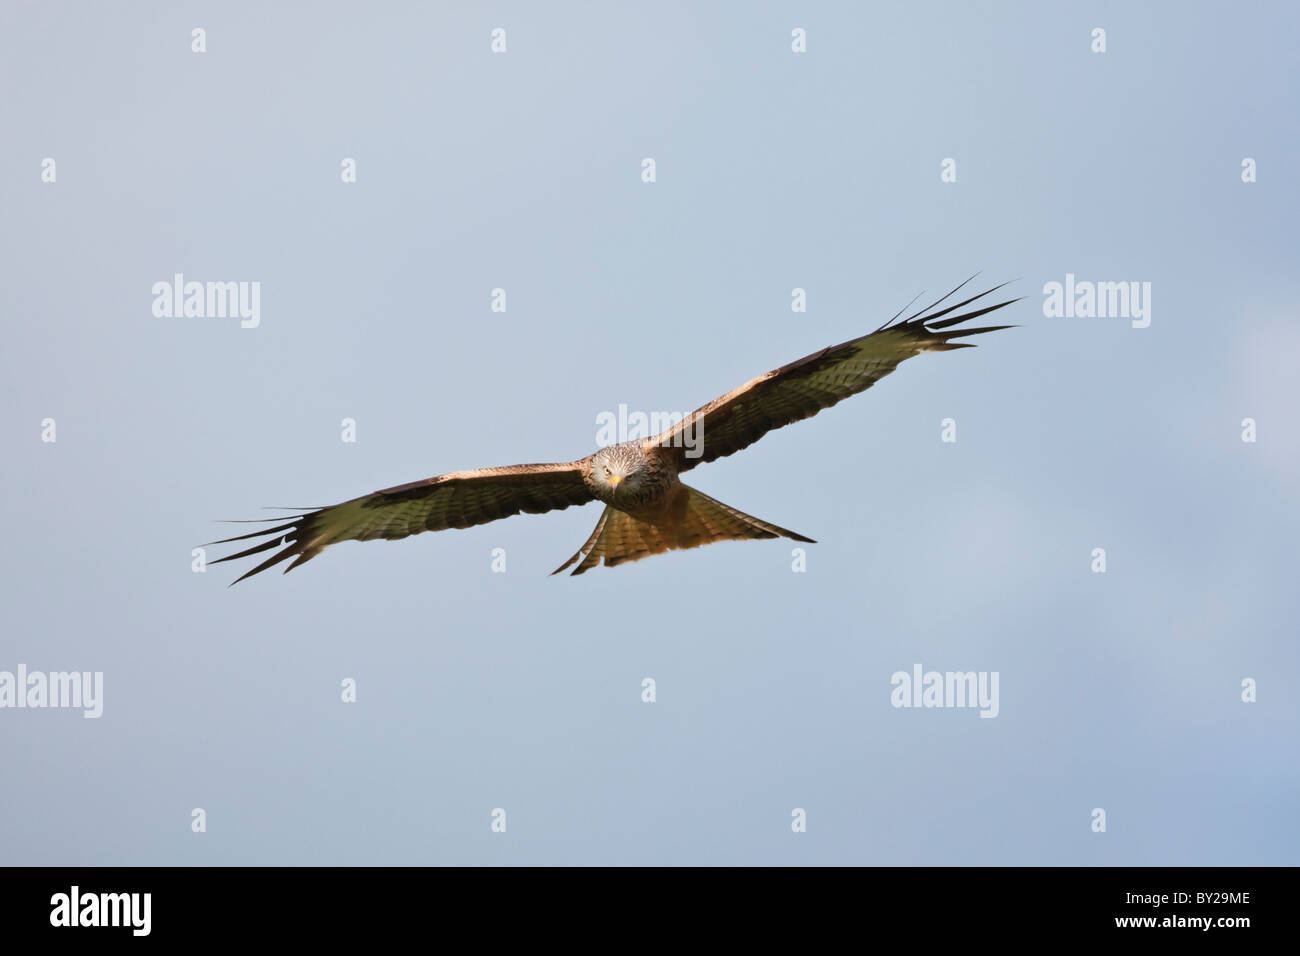 Red kite in flight against a cloudy blue sky Stock Photo